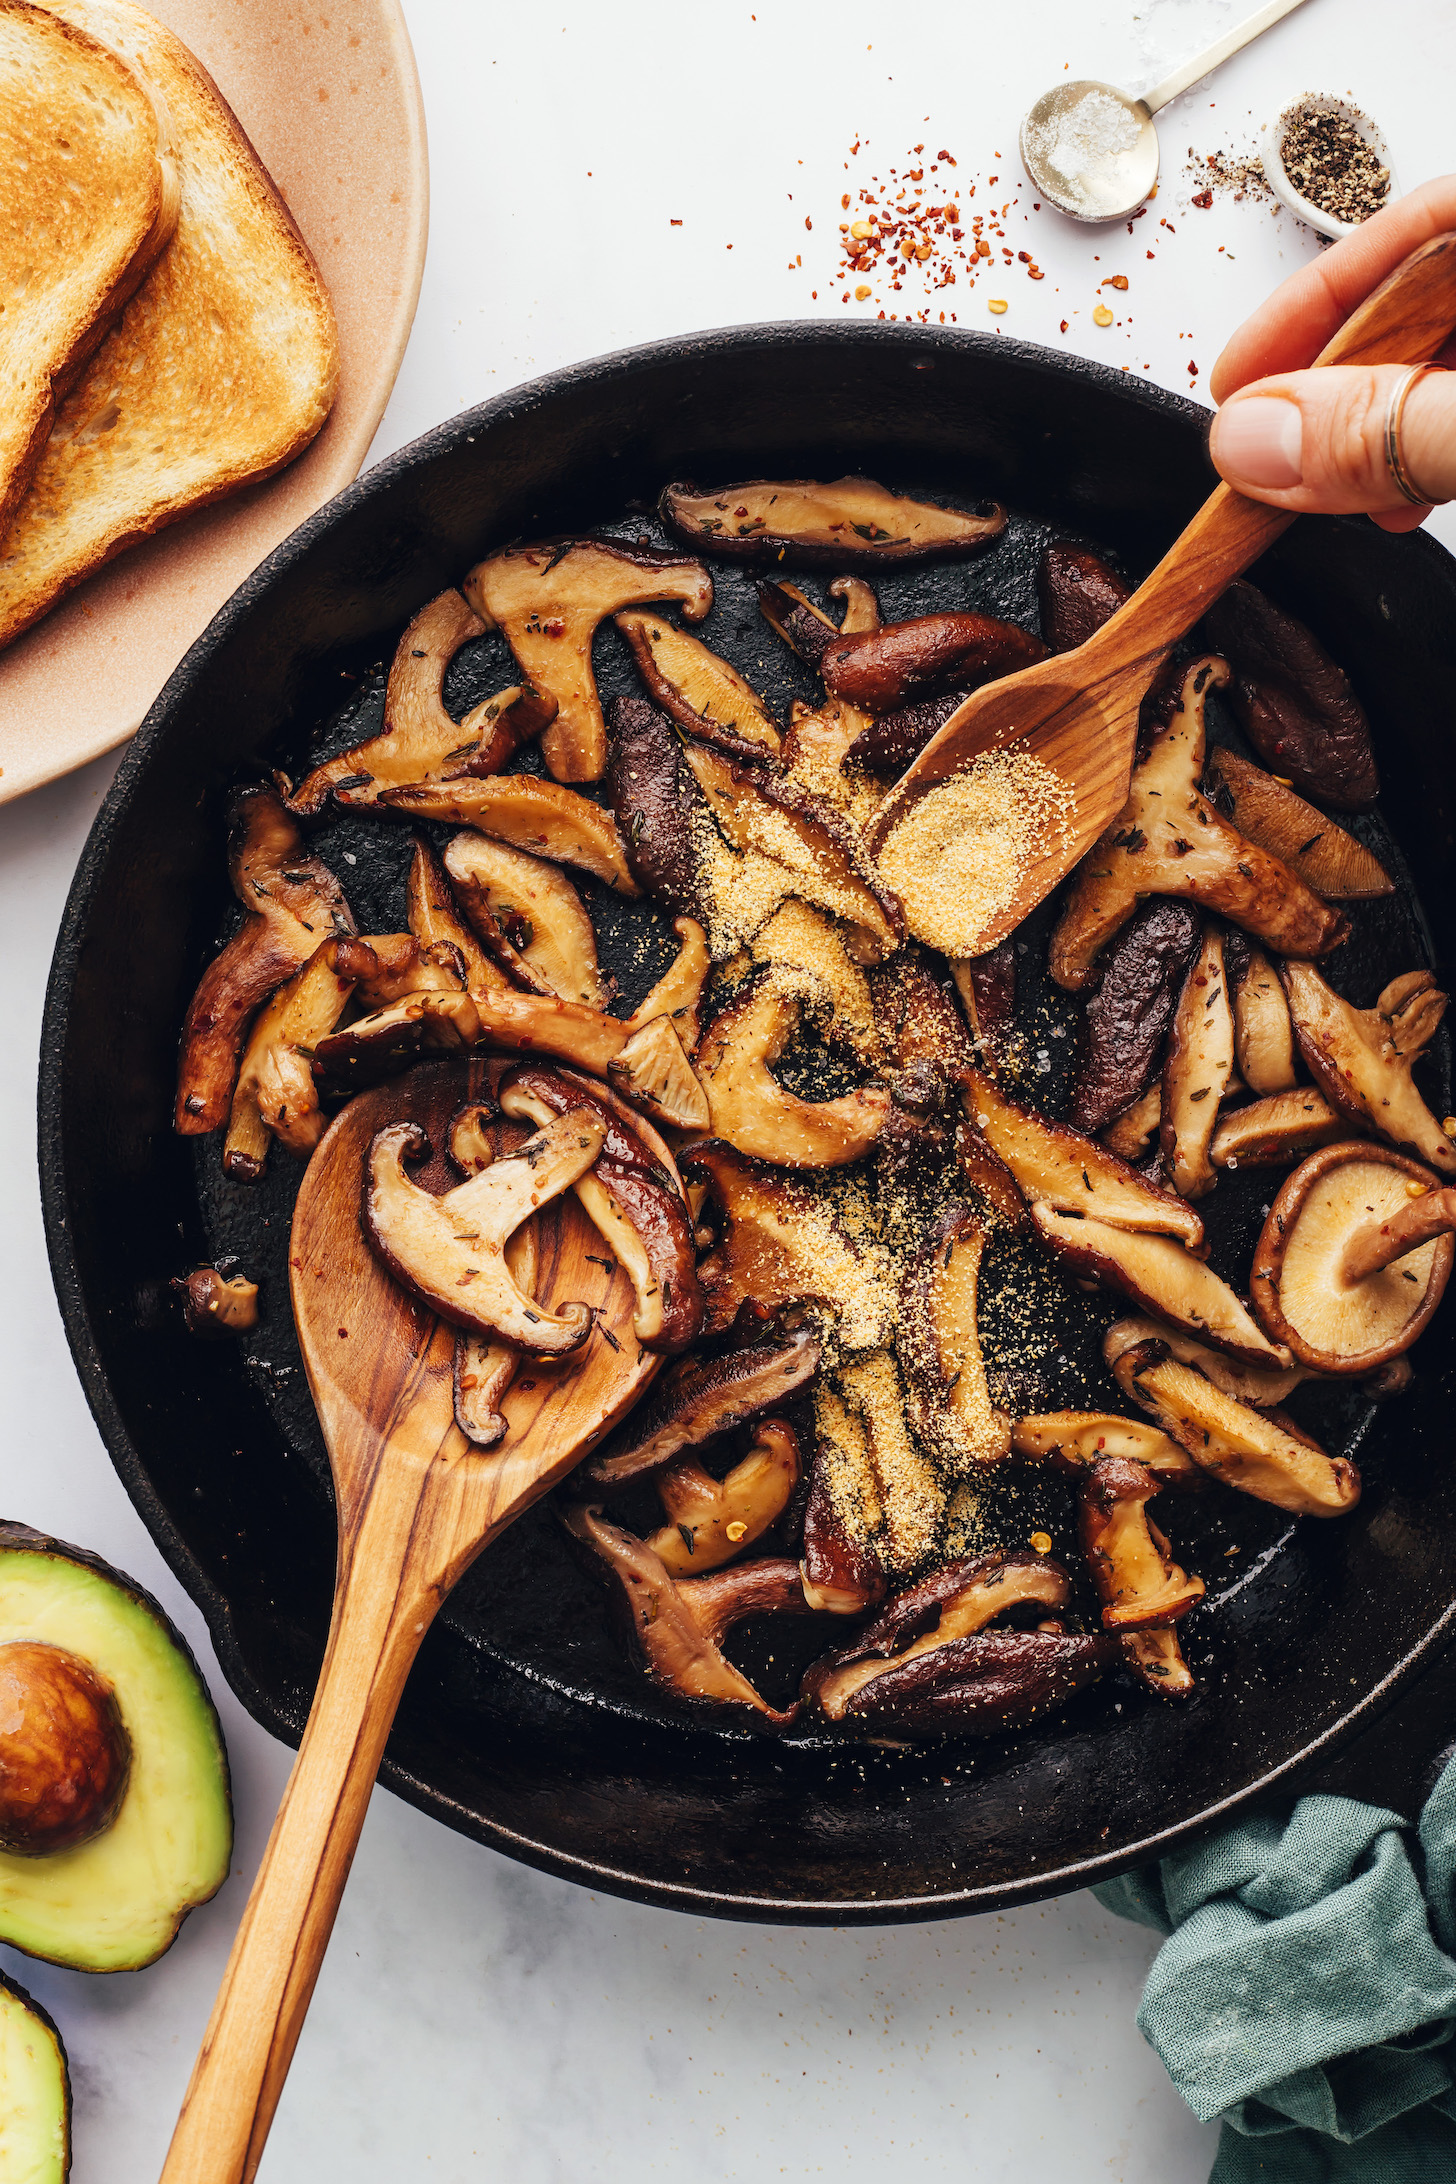 Using a small wooden spoon to sprinkle garlic powder into a pan of sautéed mushrooms